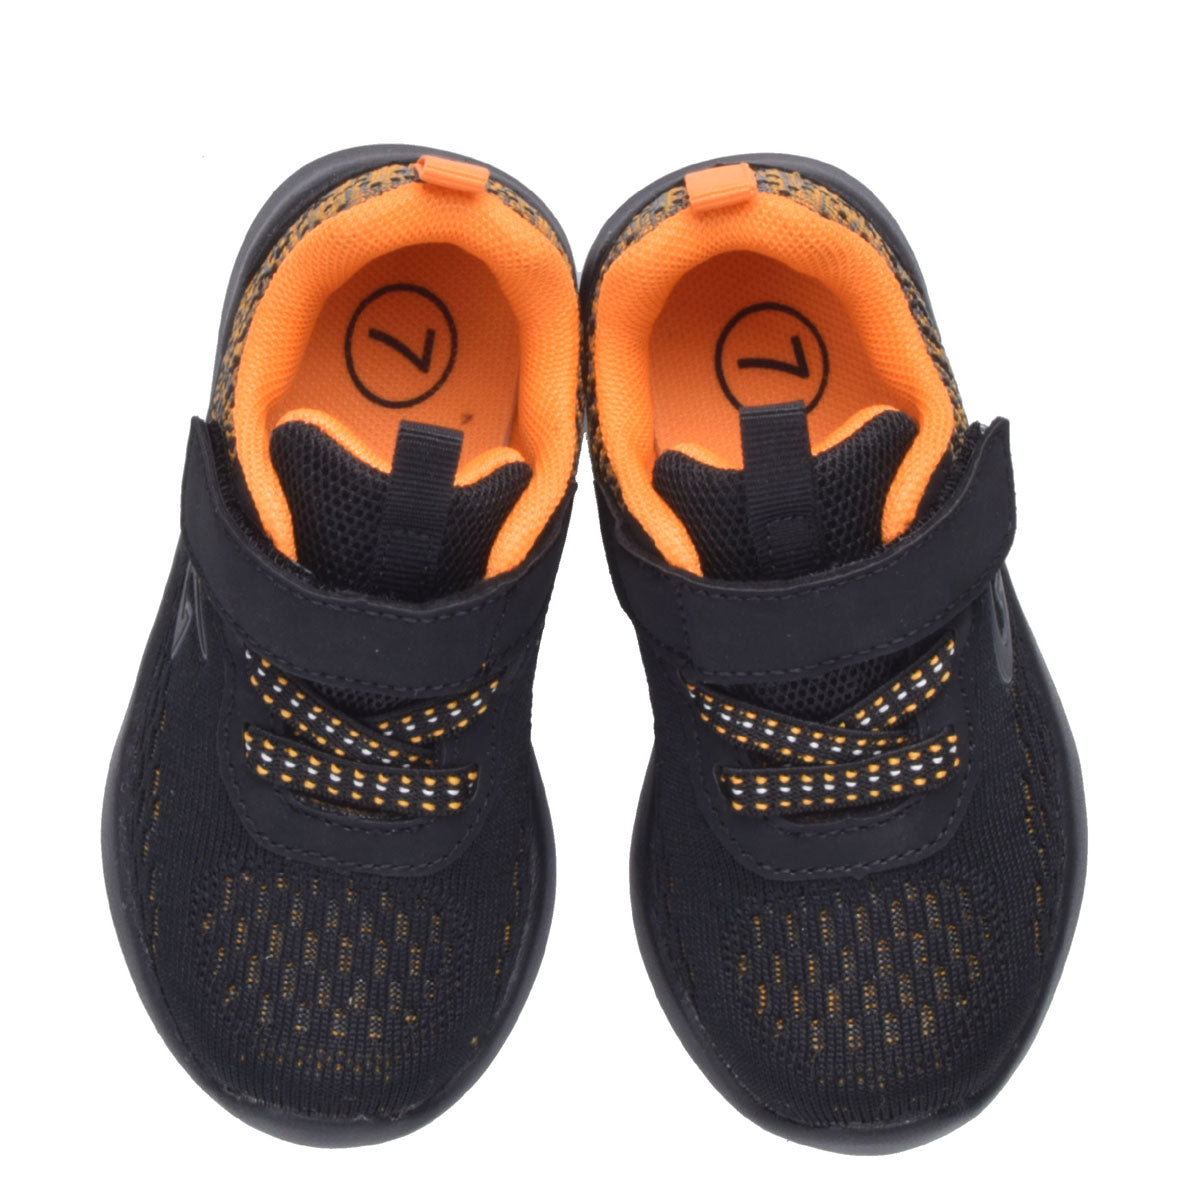 light and comfortable infant sport shoes